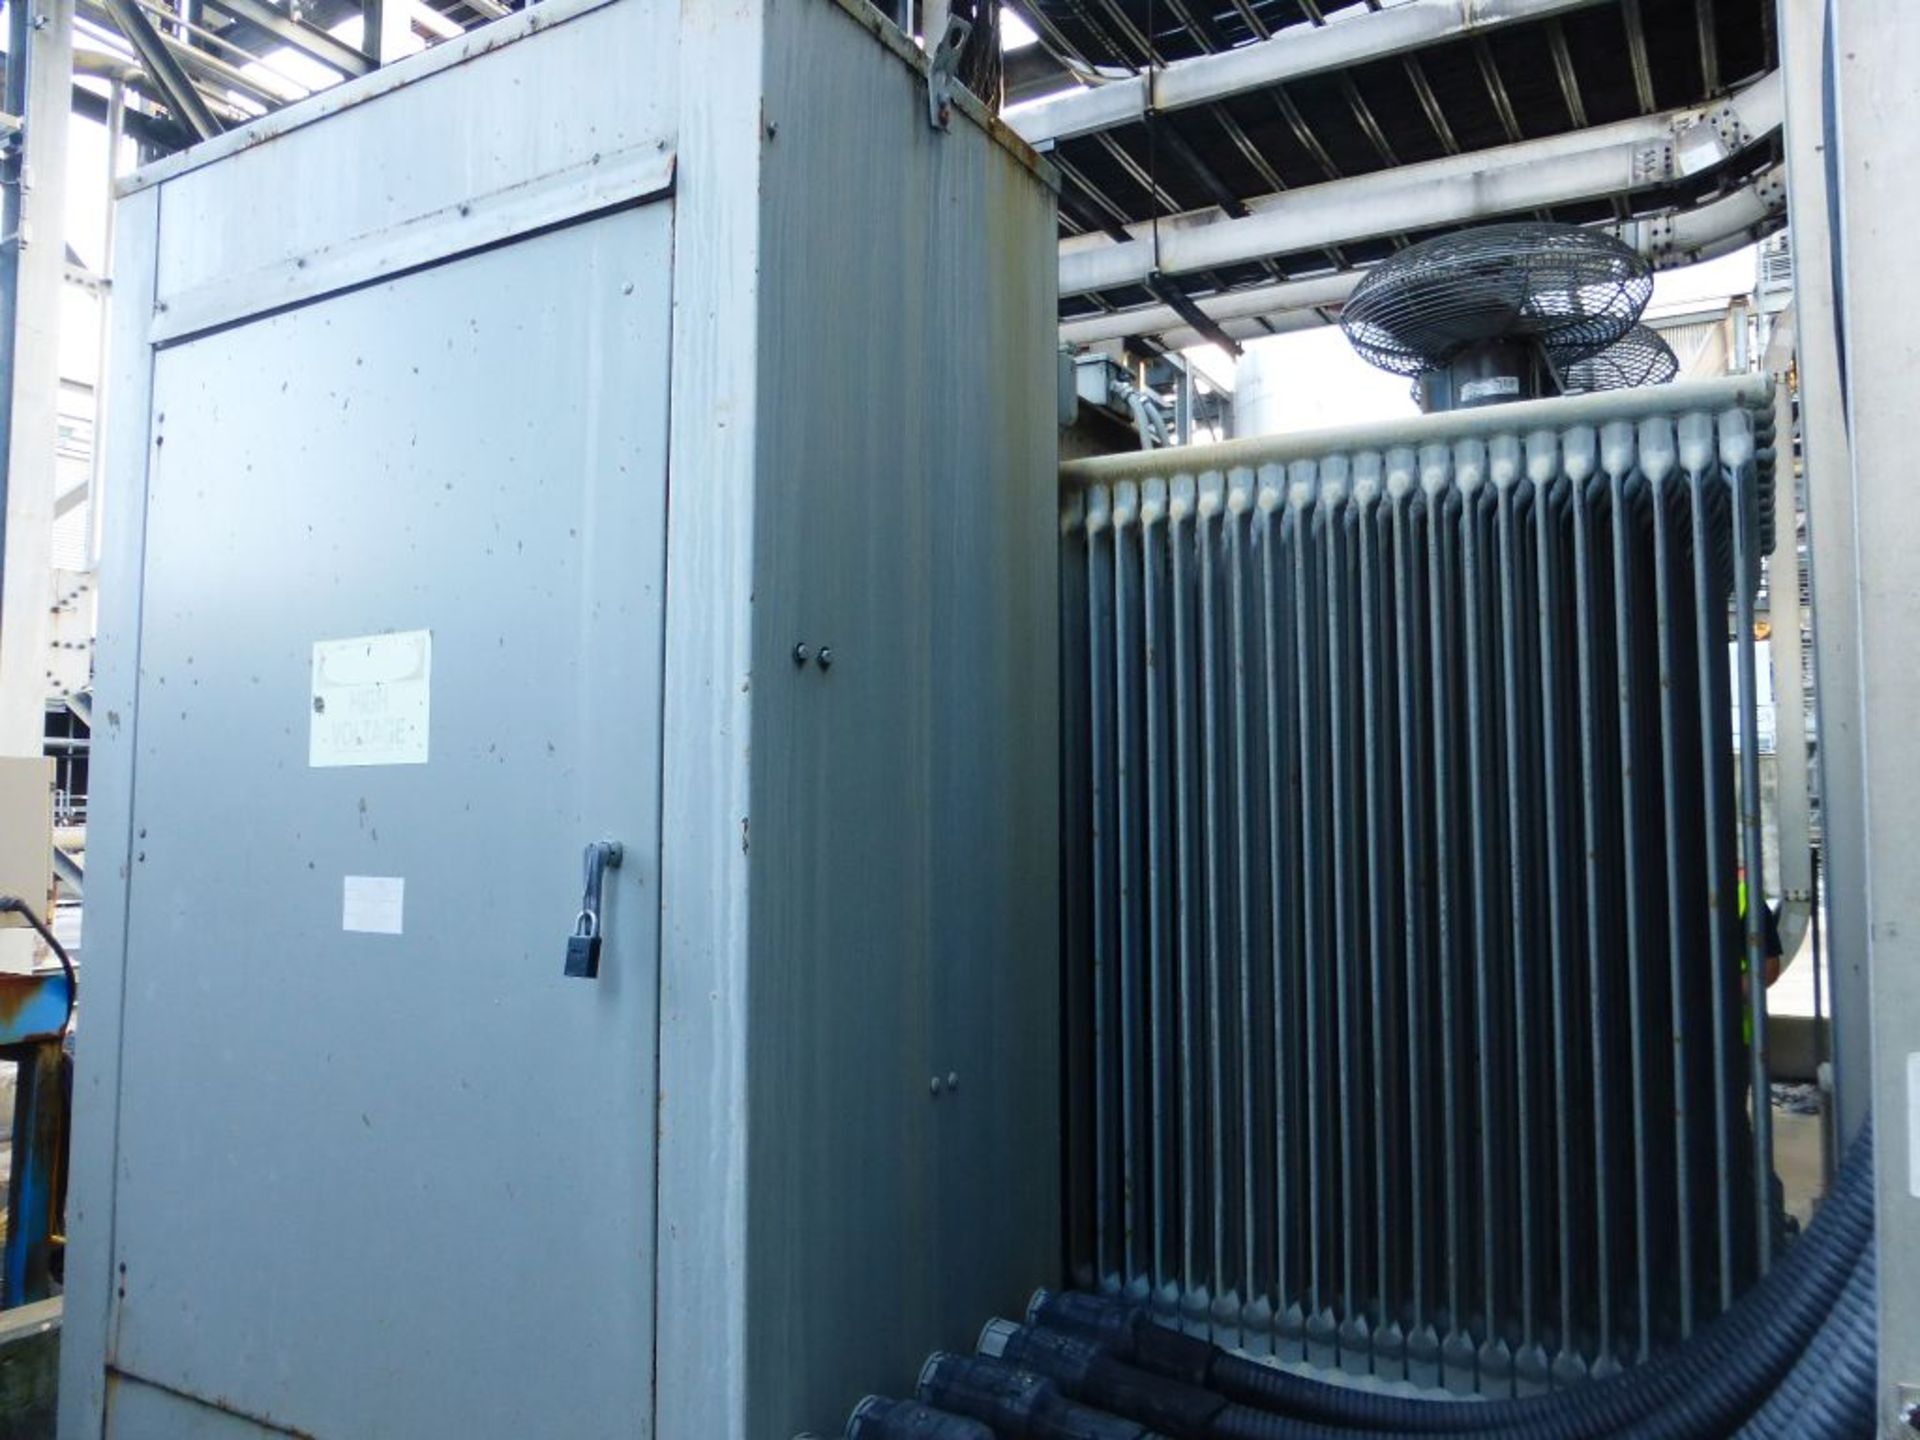 2006 Siemens Transformer w/Siemens Switch - Removed from Service January 2022 | Transformer: 2500/ - Image 4 of 11